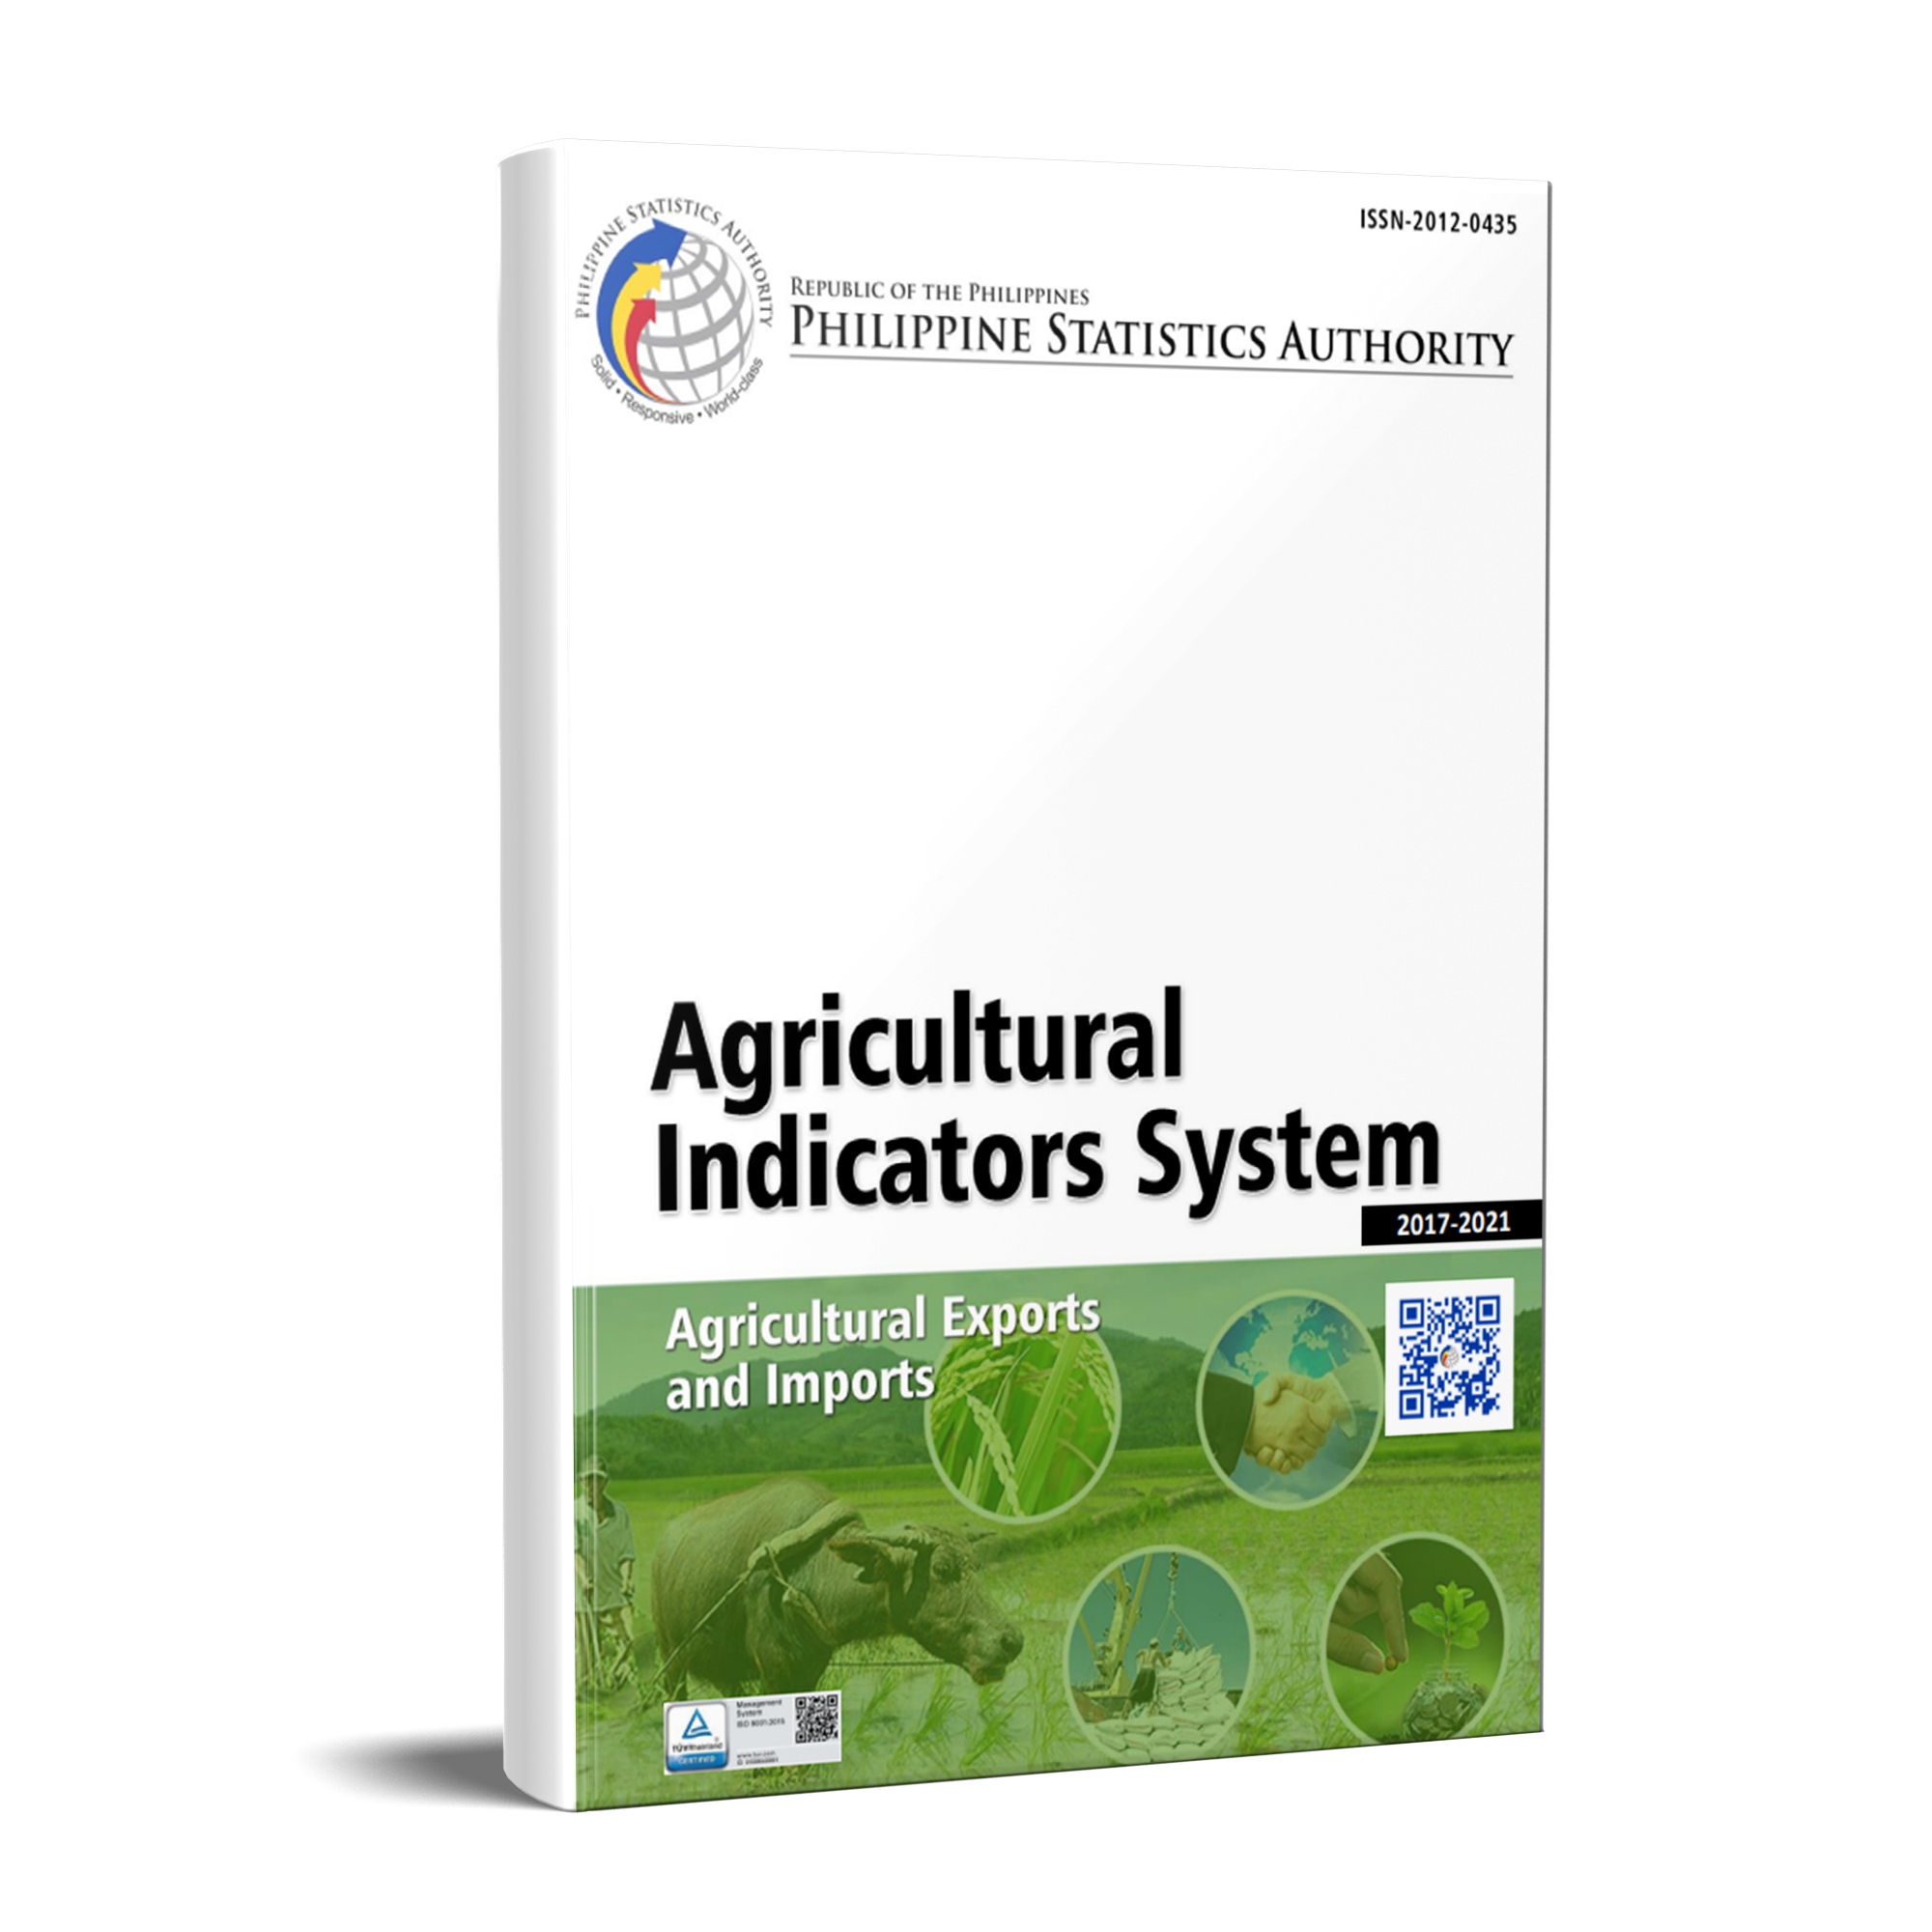 Agricultural Indicators System: Agricultural Exports and Imports